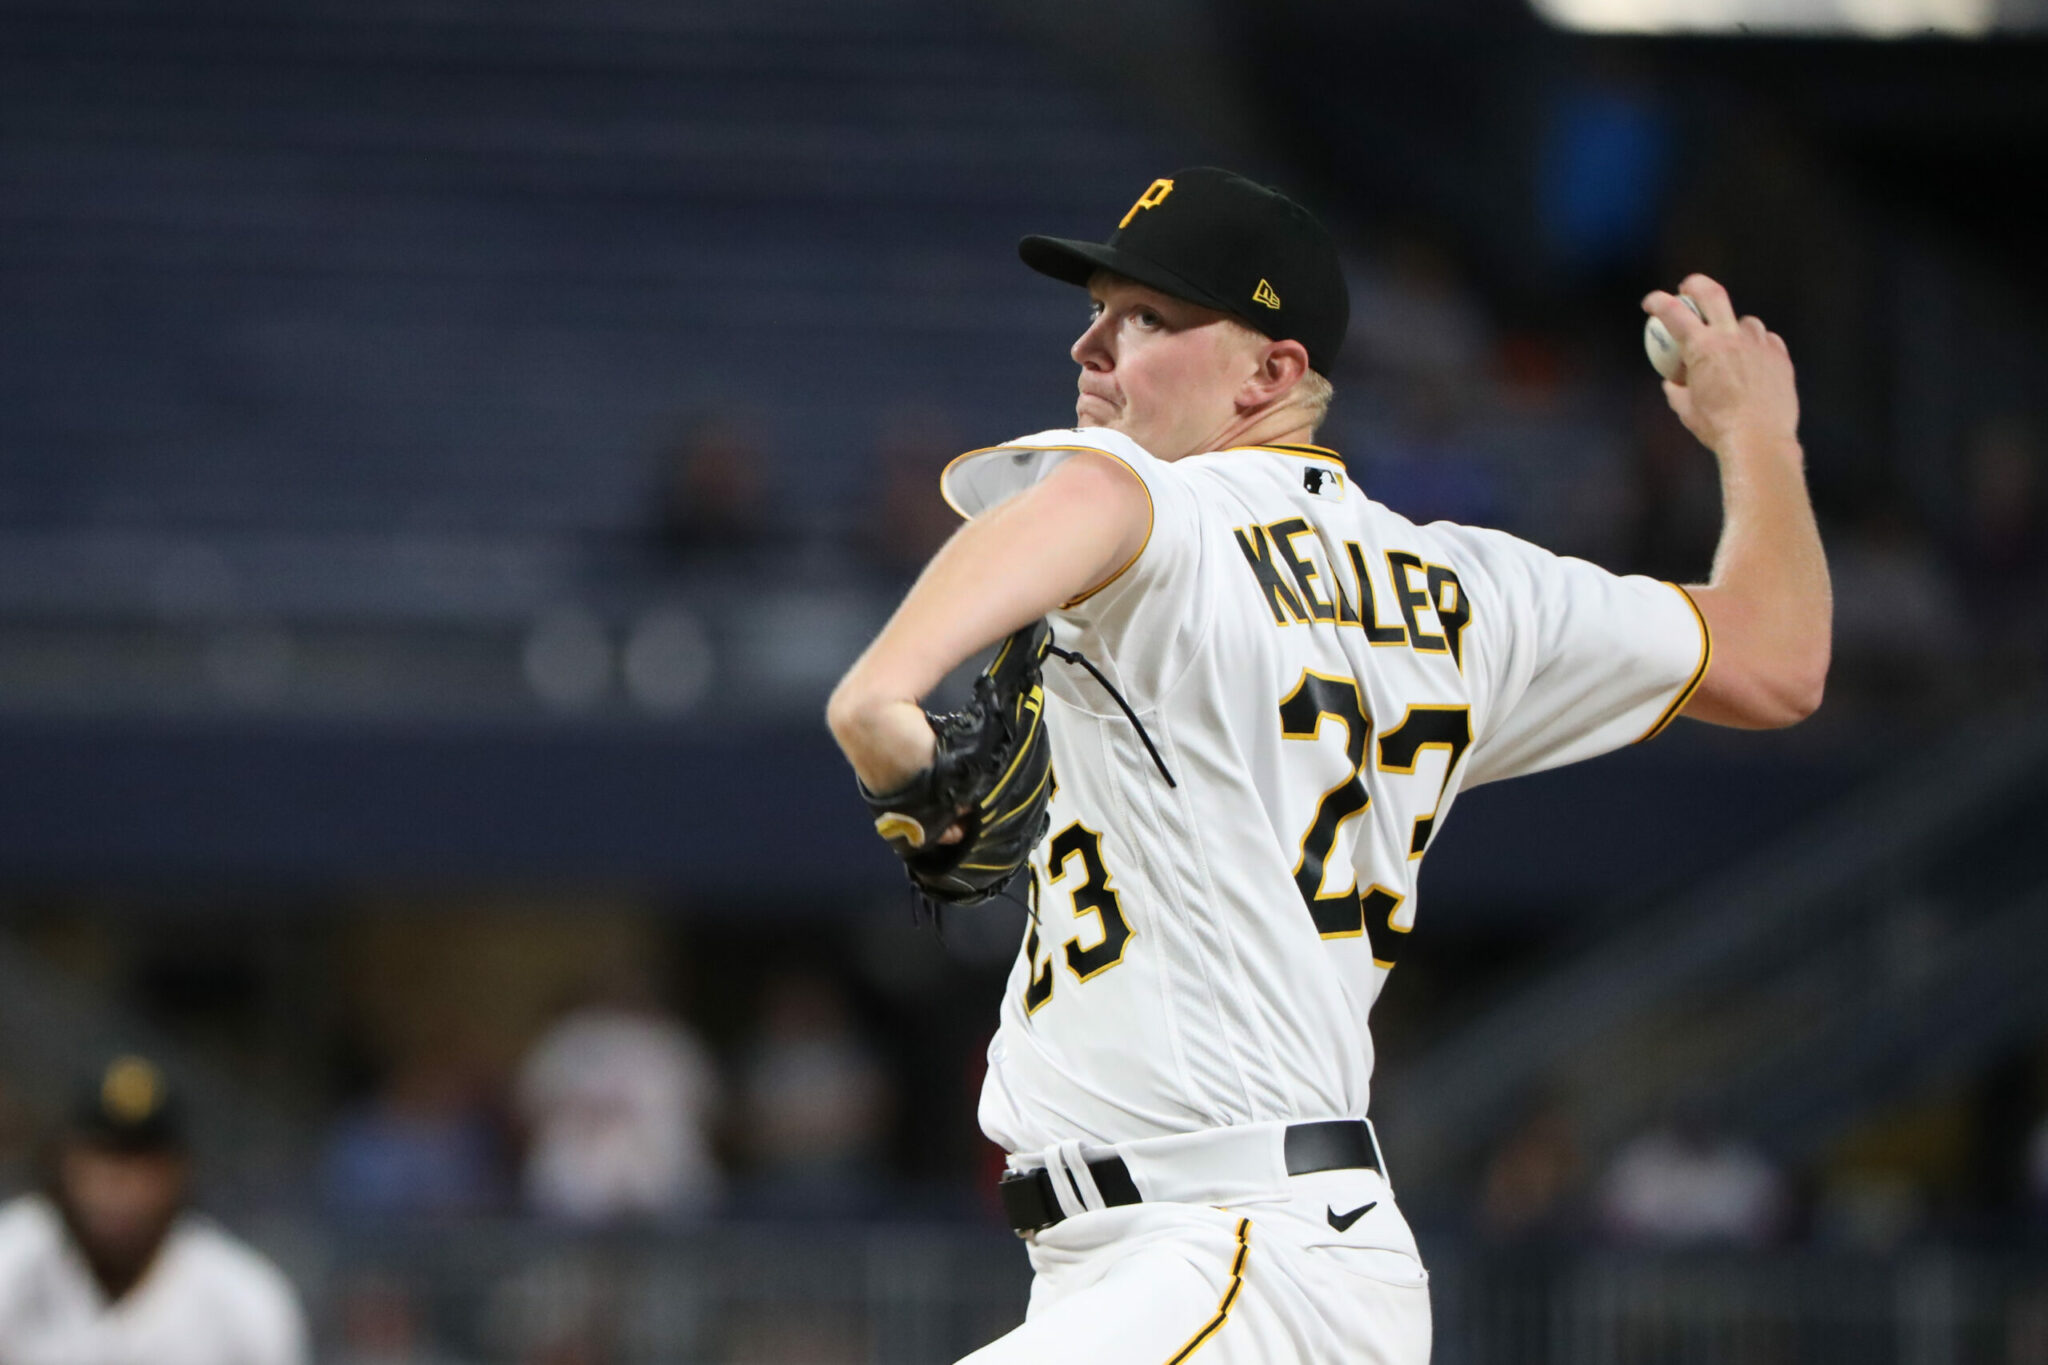 Pirates Roundtable: Where Do the Pirates Need to Add to Their Pitching Staff?